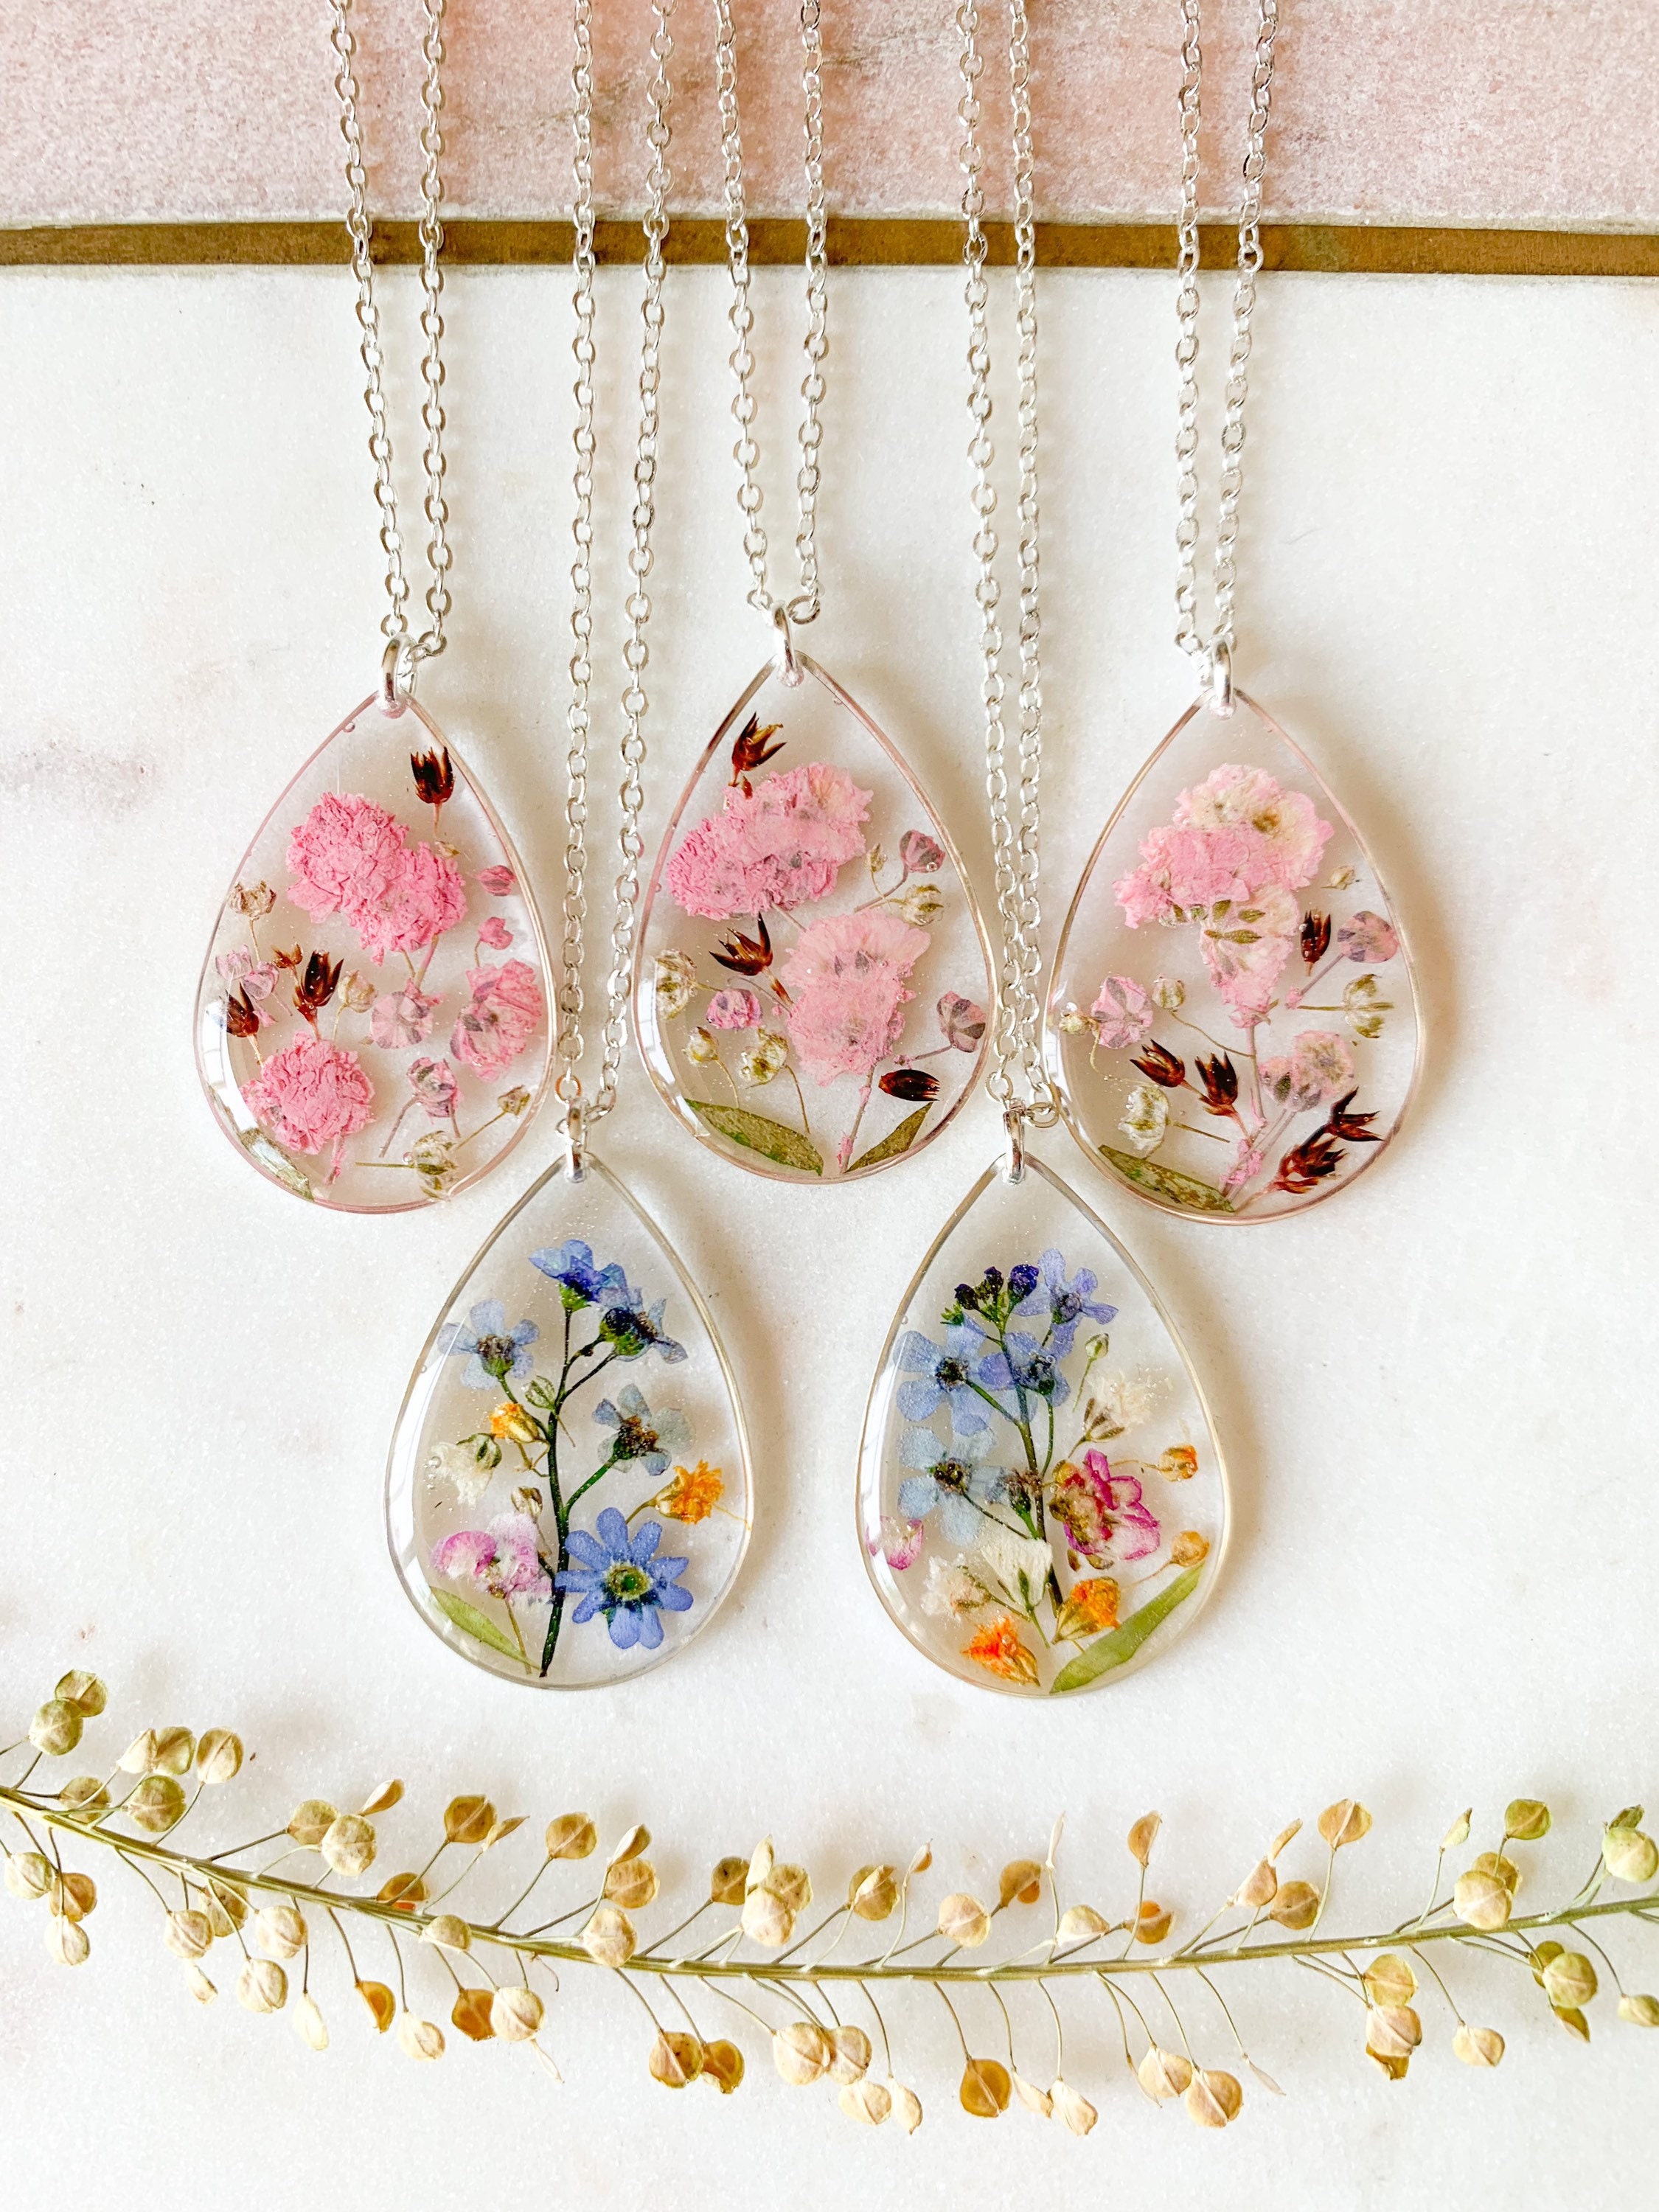 Preserved Wild Flower Pendant Necklace On 22K Silver Plated Fine Chain/Boho Chic Pressed Flowers Jewellery Floral